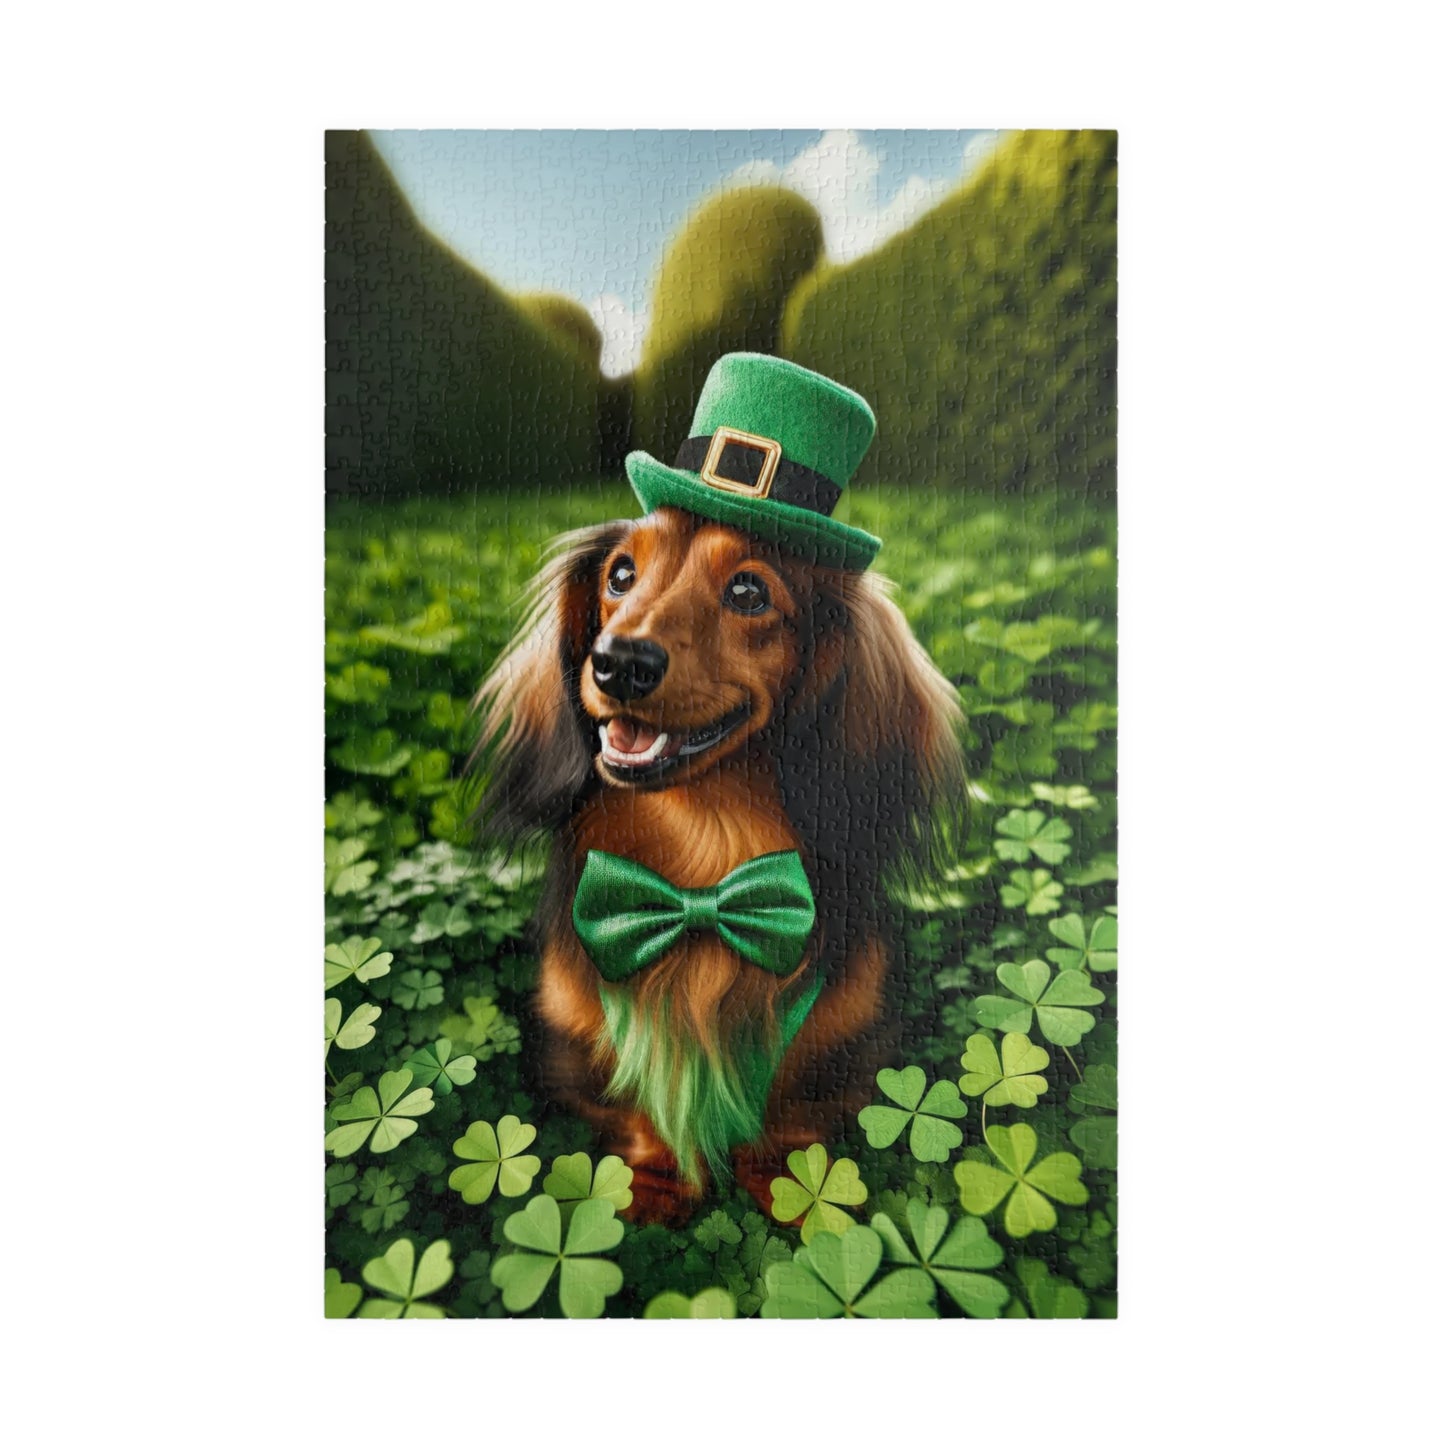 St. Patrick's Day Leprechaun Miniature Dachshund Jigsaw Puzzle - Long Haired Chocolate and Cream Mini Doxie 110, 252, 520 or 1014 Pieces